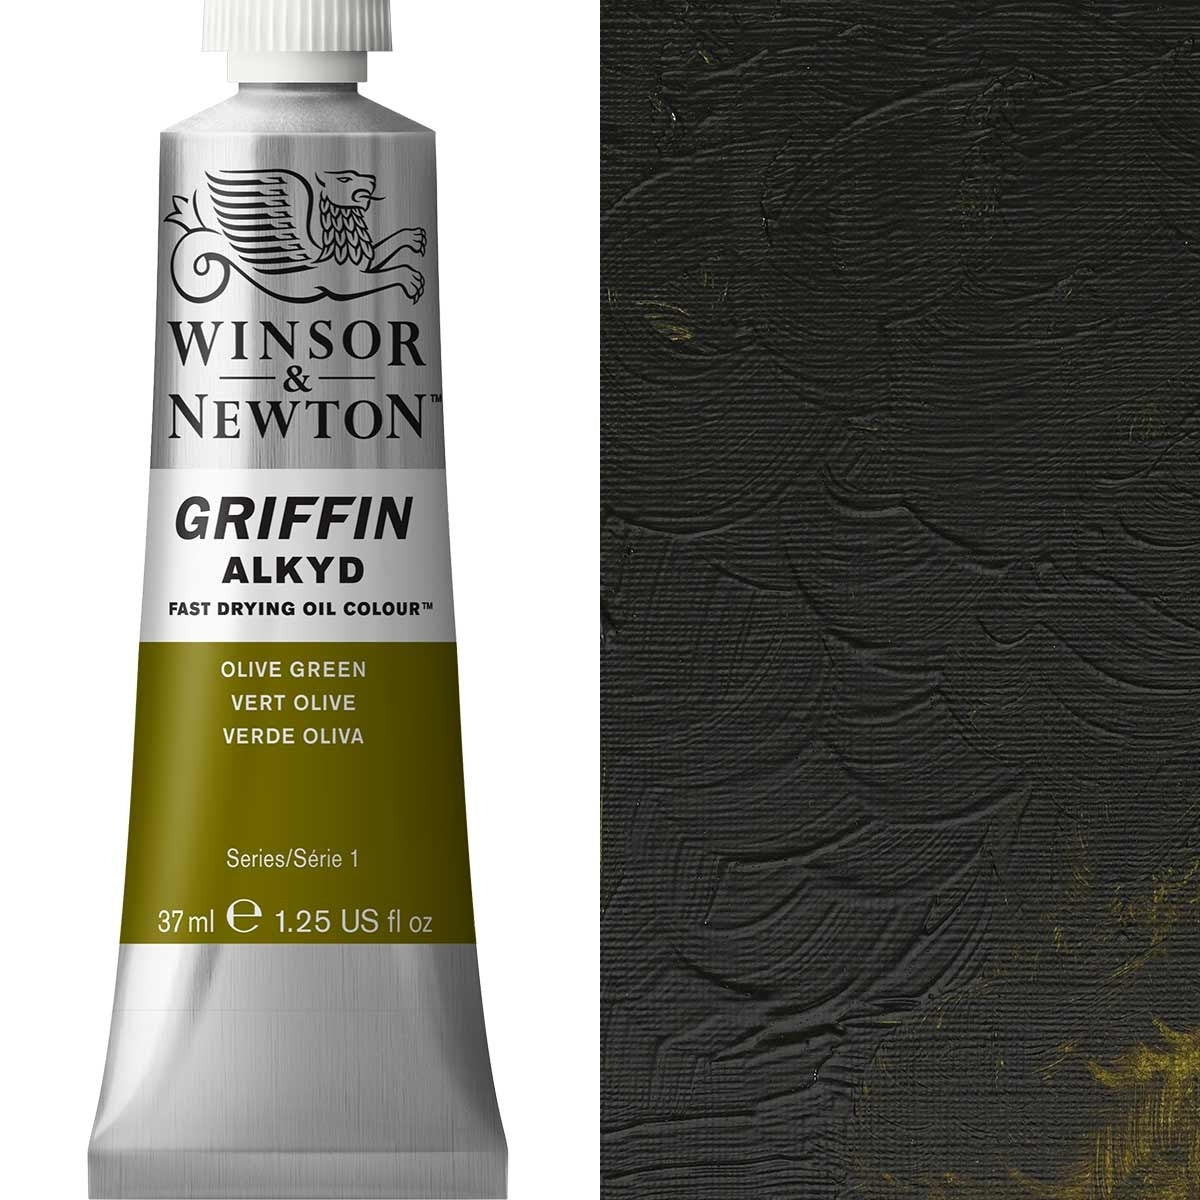 Winsor and Newton - Griffin ALKYD Oil Colour - 37ml - Olive Green